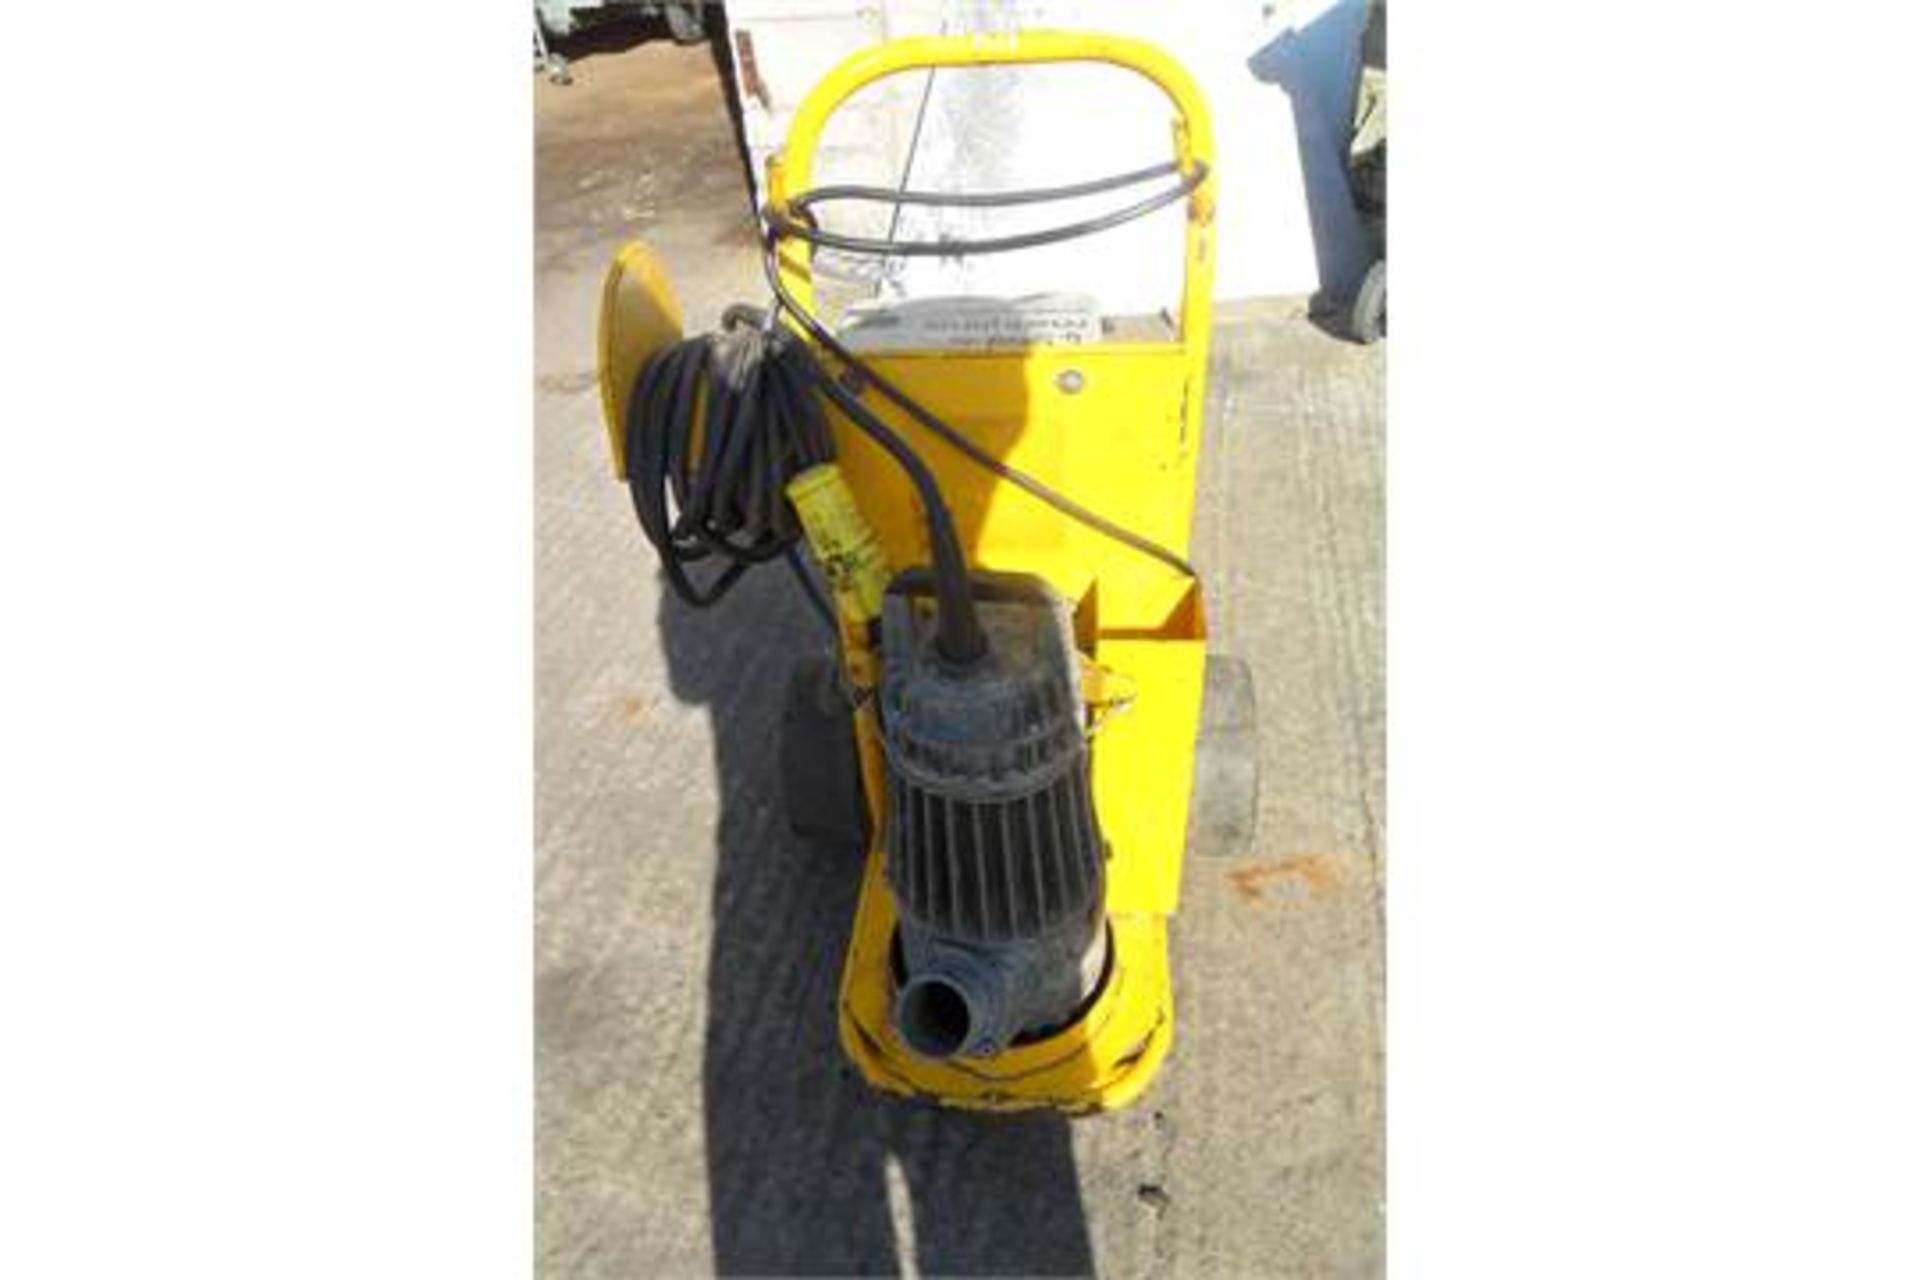 110V industrial 3" Submersible Pump, with Trolley and Control Box.